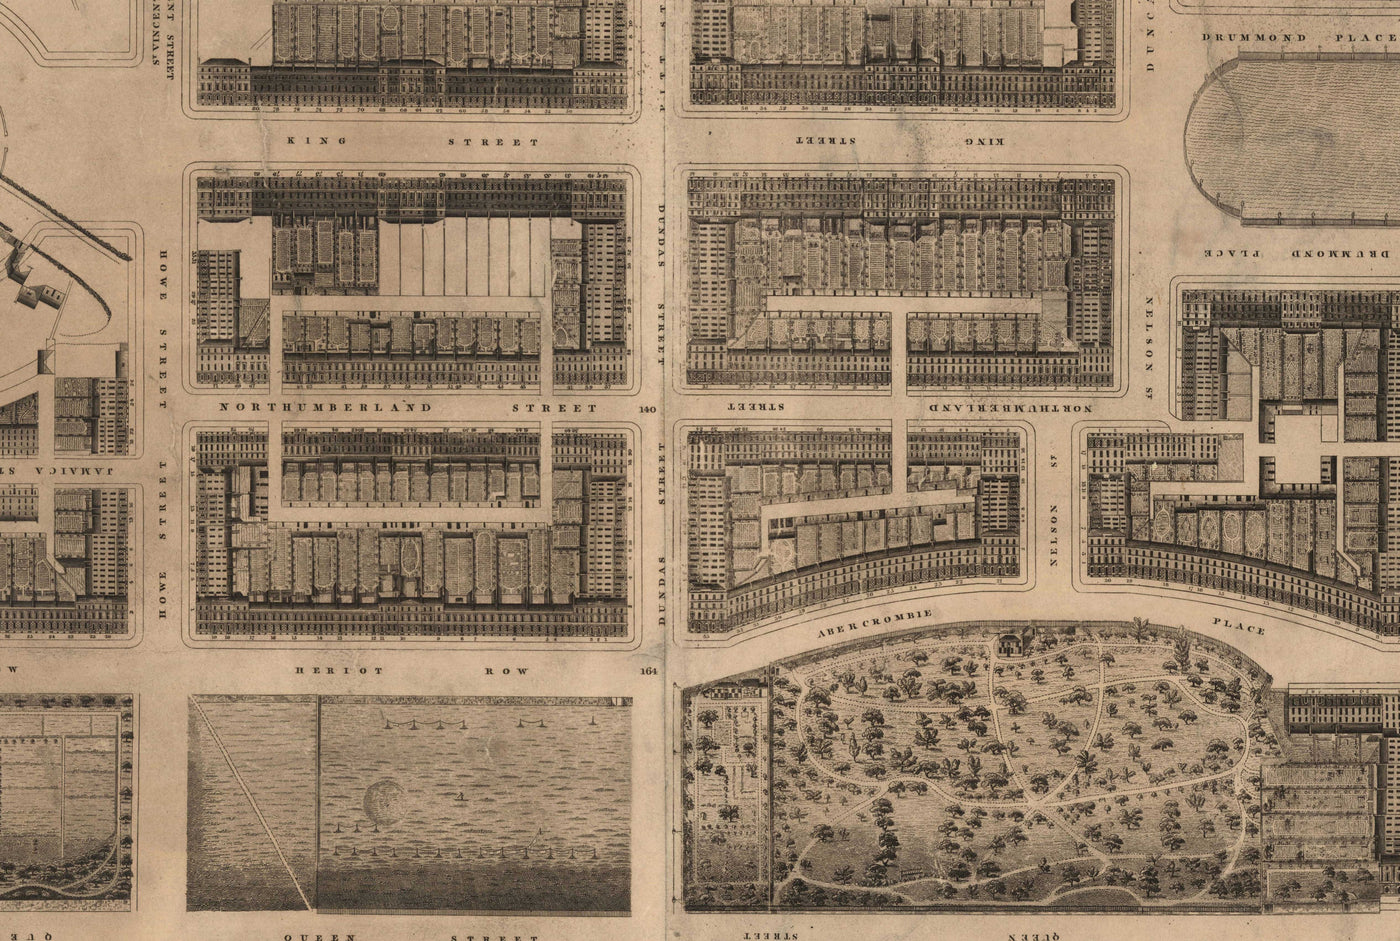 Old Map of New Town, Edinburgh in 1821 by James Kirkwood - Calton Hill, Queen Street, York Place, Prince Street, Great King Street